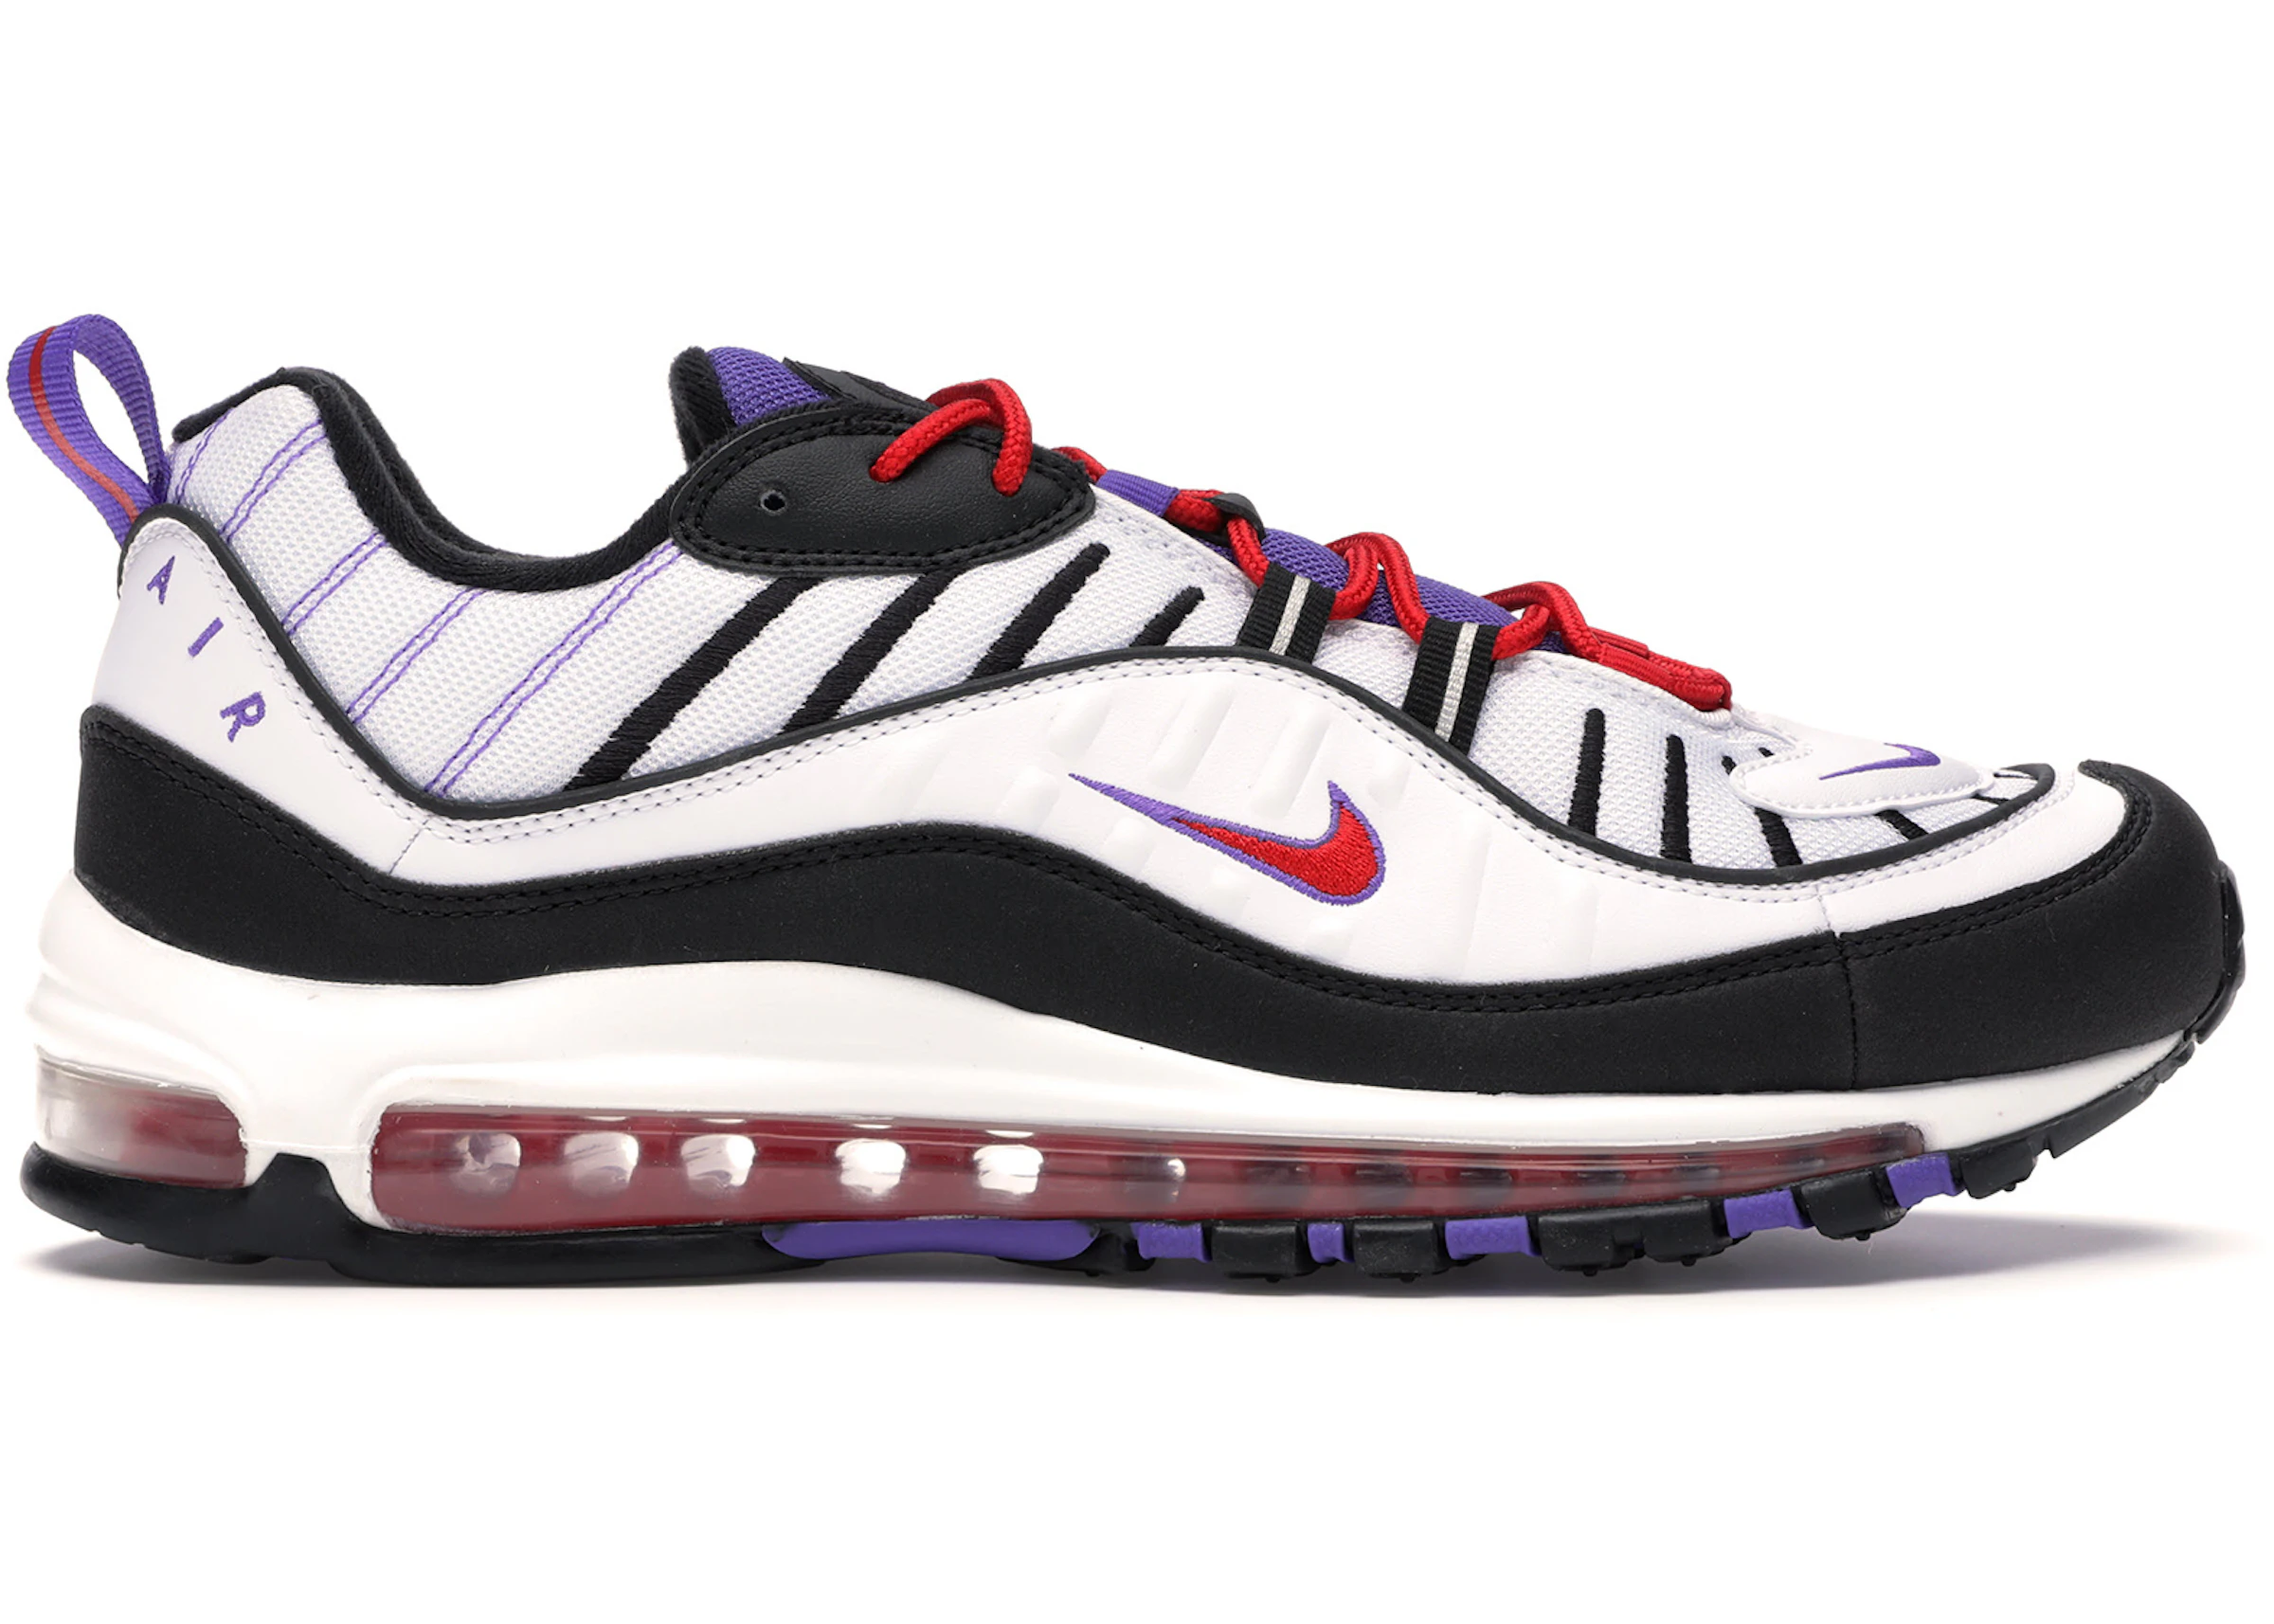 midnight spare Large universe Buy Nike Air Max 98 Shoes & New Sneakers - StockX